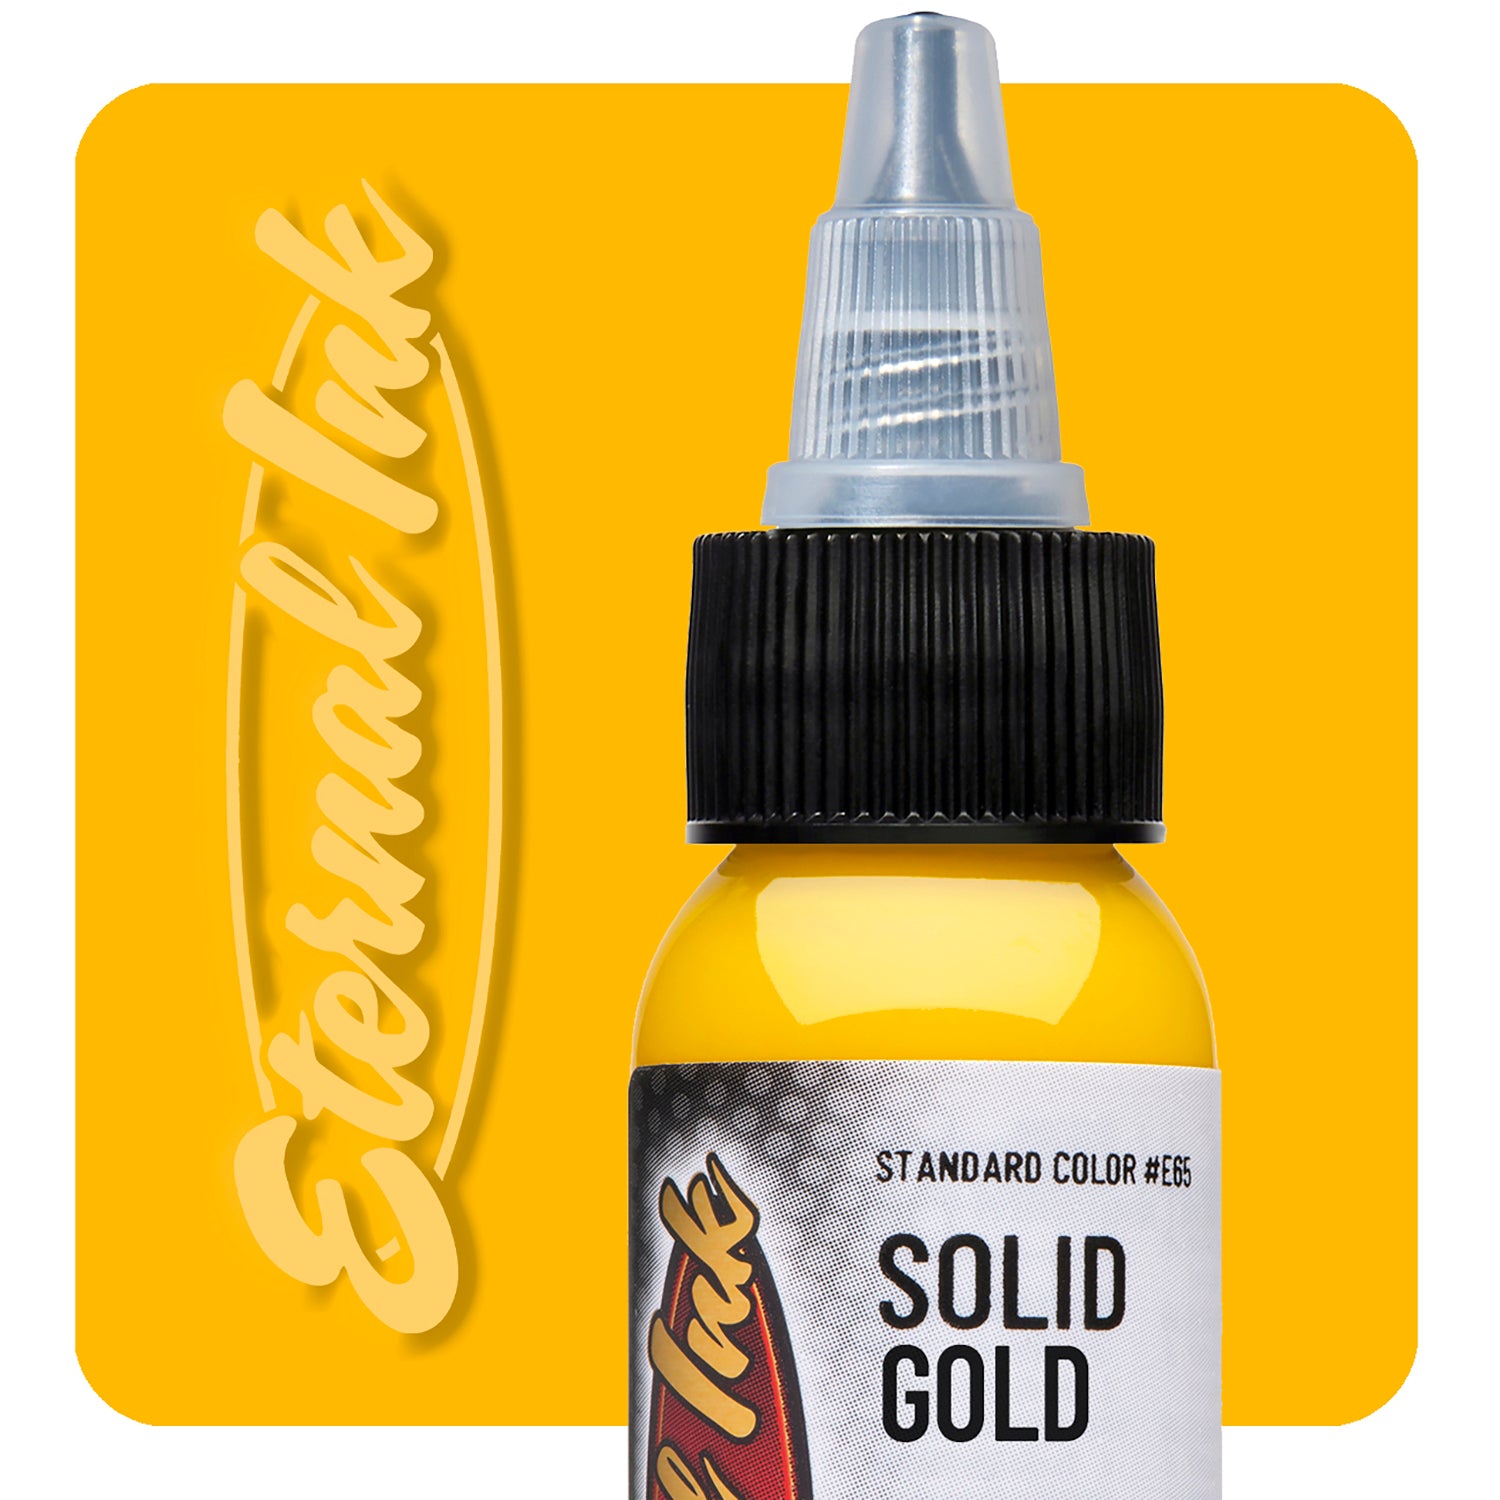 Eternal Ink Solid Gold Tattoo Ink in Yellow, Size: 1 oz Available at TATSoul Tattoo Supply